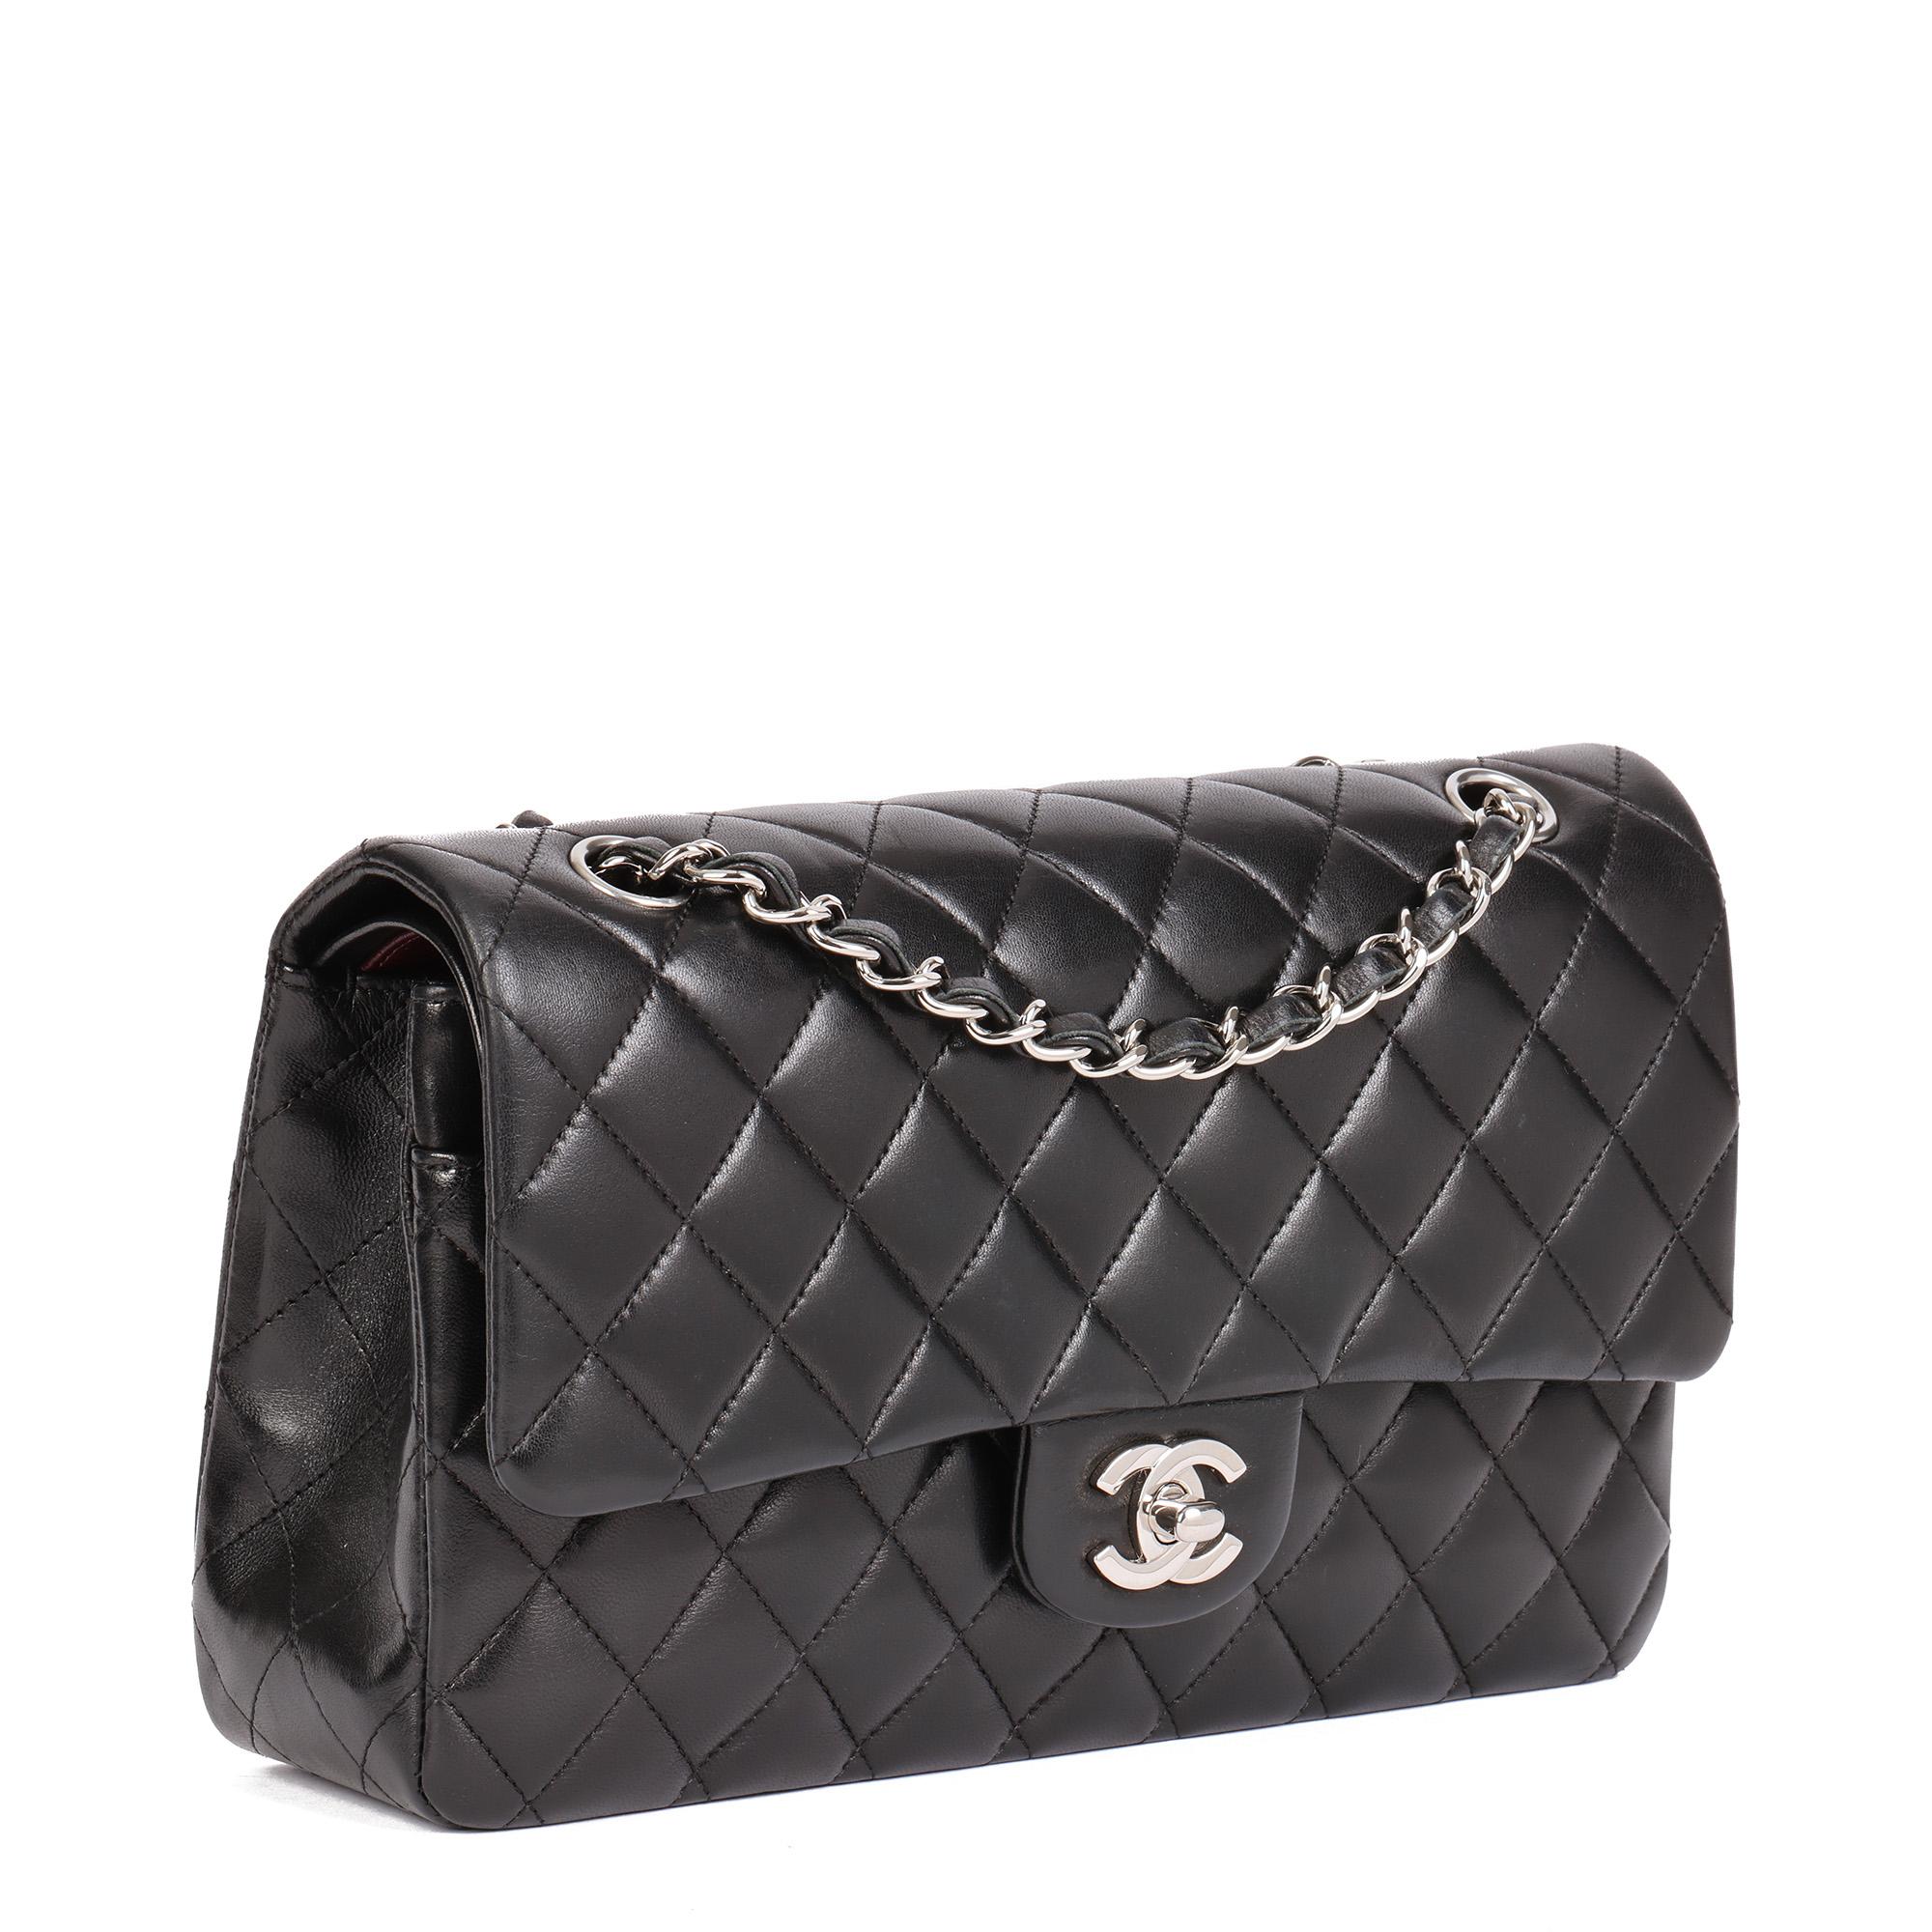 CHANEL
Black Quilted Lambskin Medium Classic Double Flap Bag

Xupes Reference: HB4776
Serial Number: 11479063
Age (Circa): 2006
Accompanied By: Chanel Dust Bag, Authenticity Card, Care Booklet, Chanel Ribbon
Authenticity Details: Authenticity Card,